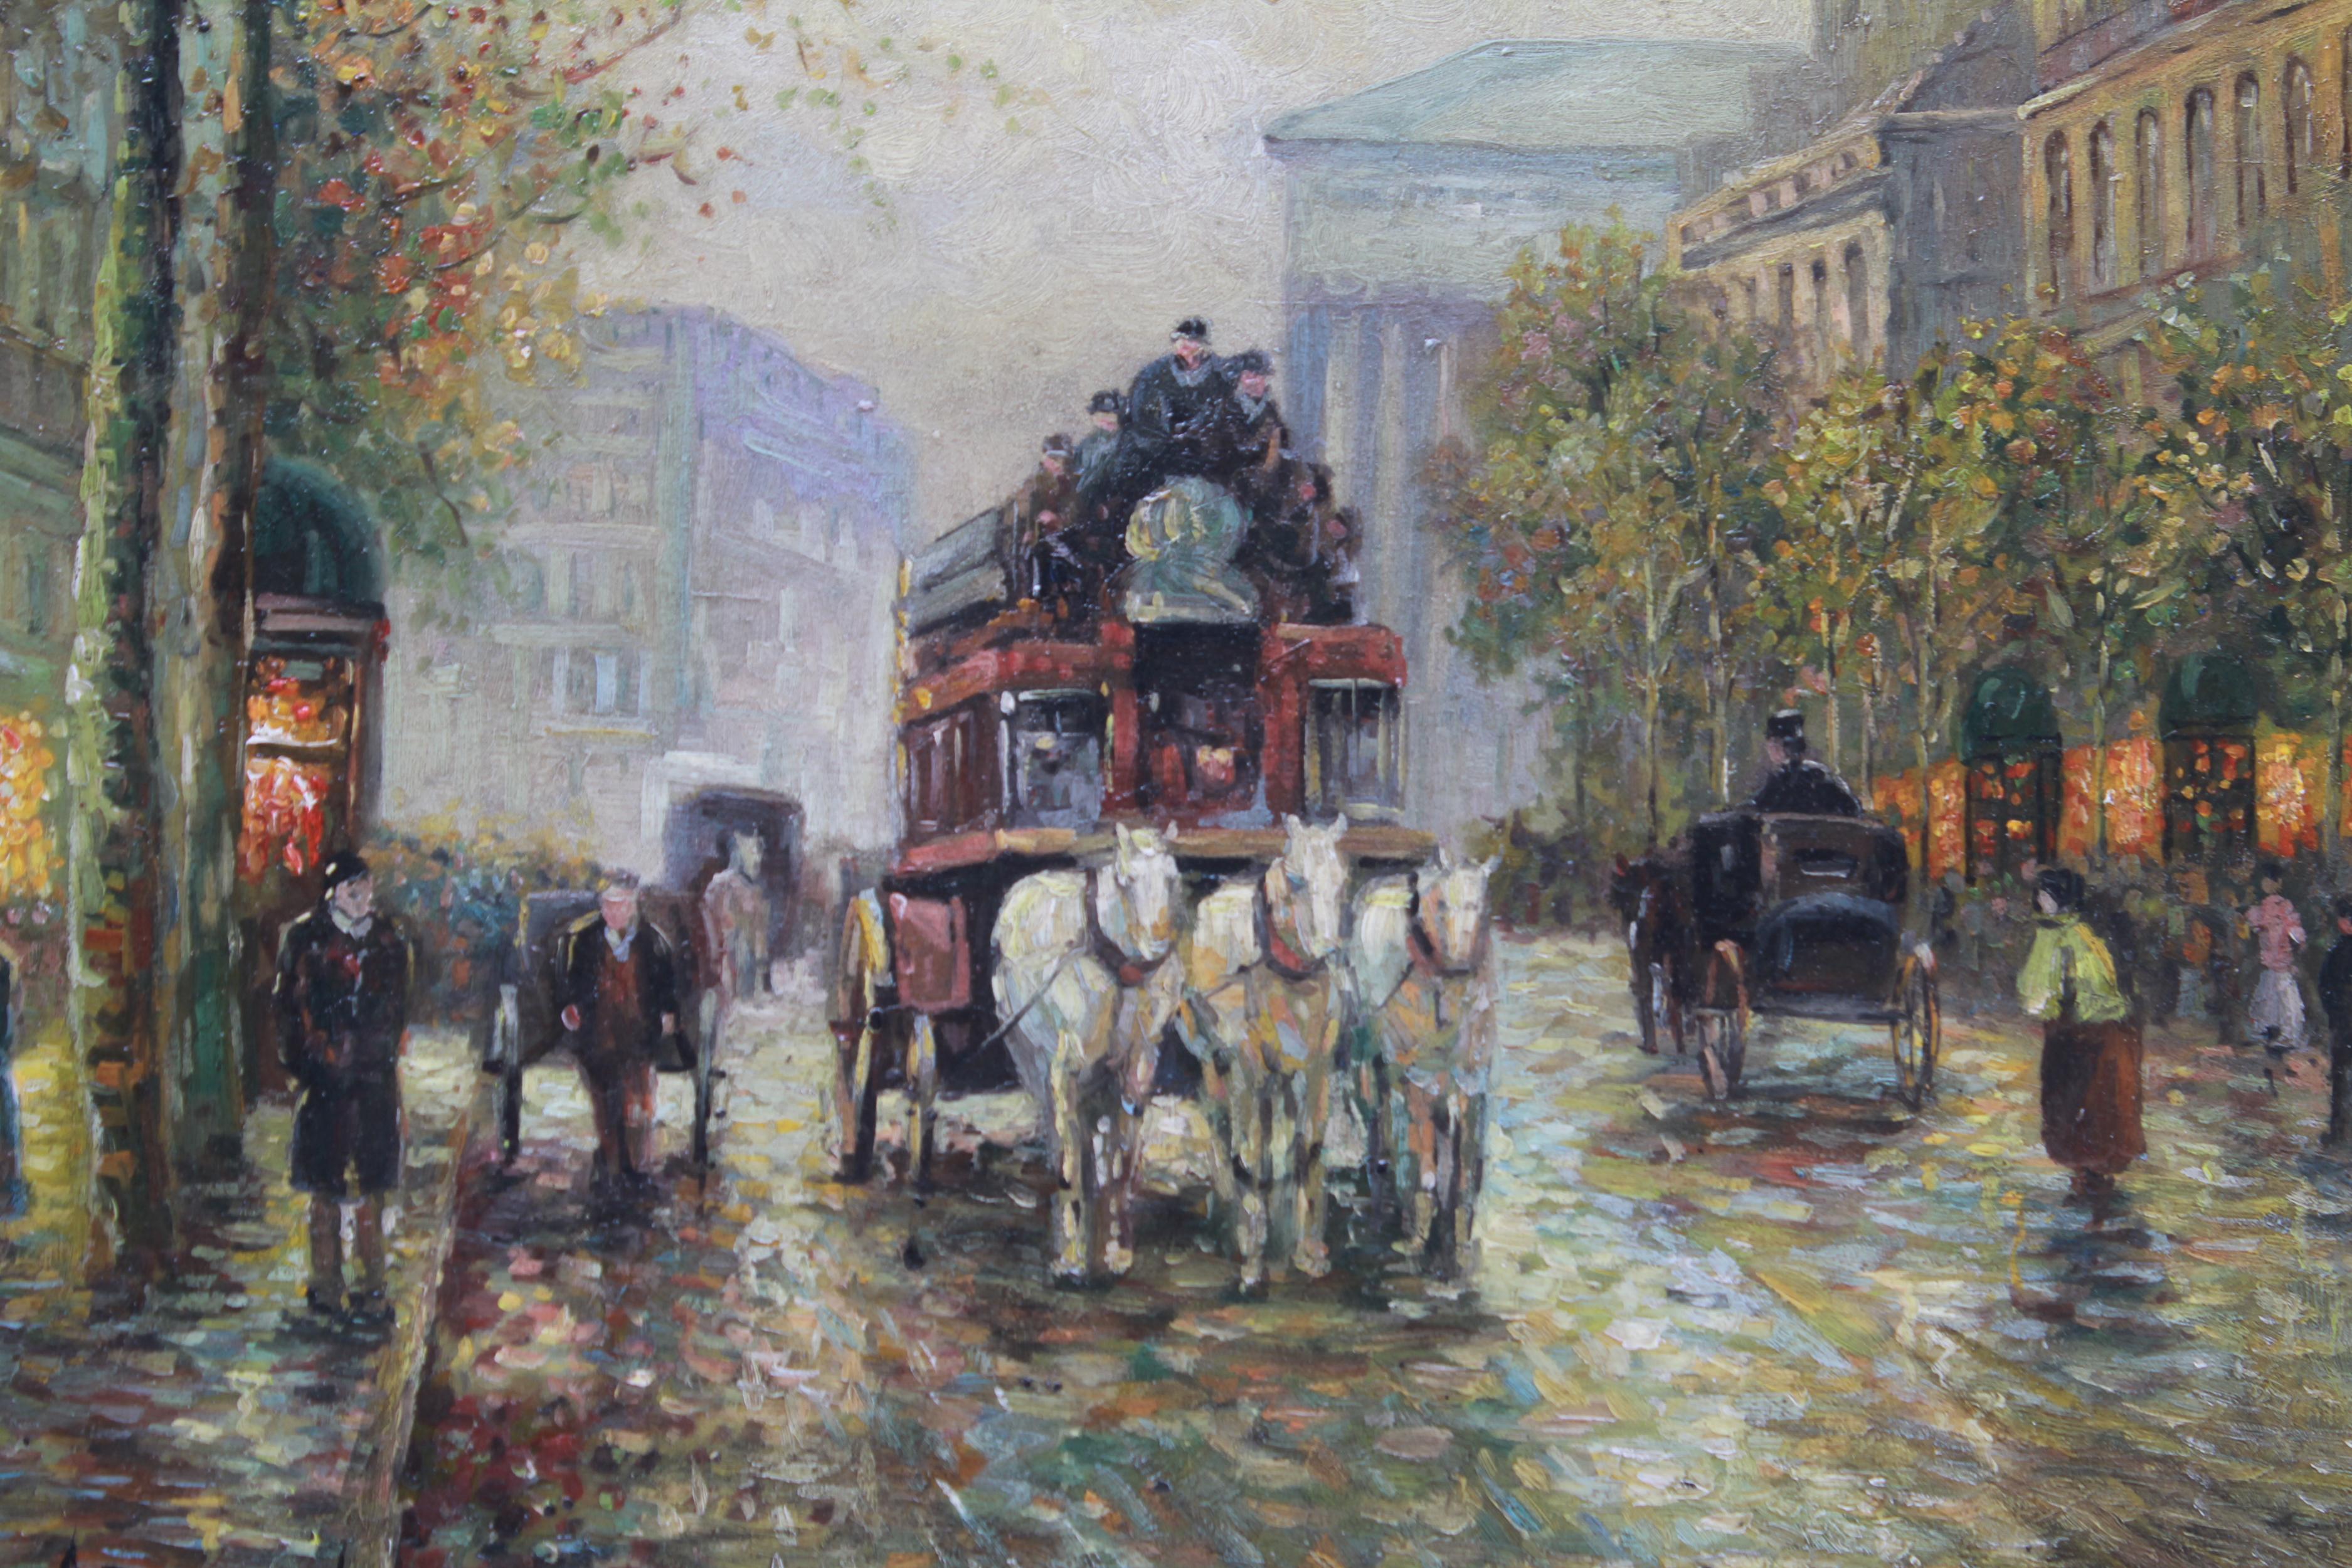 Albert Munghard (American, 1919-1998) Belle Époque style oil on board painting of a Parisian street scene near the Eglise de la Madeleine, with horses and carriages. The piece is signed in the lower left 'A. Munghard'. In great vintage condition.